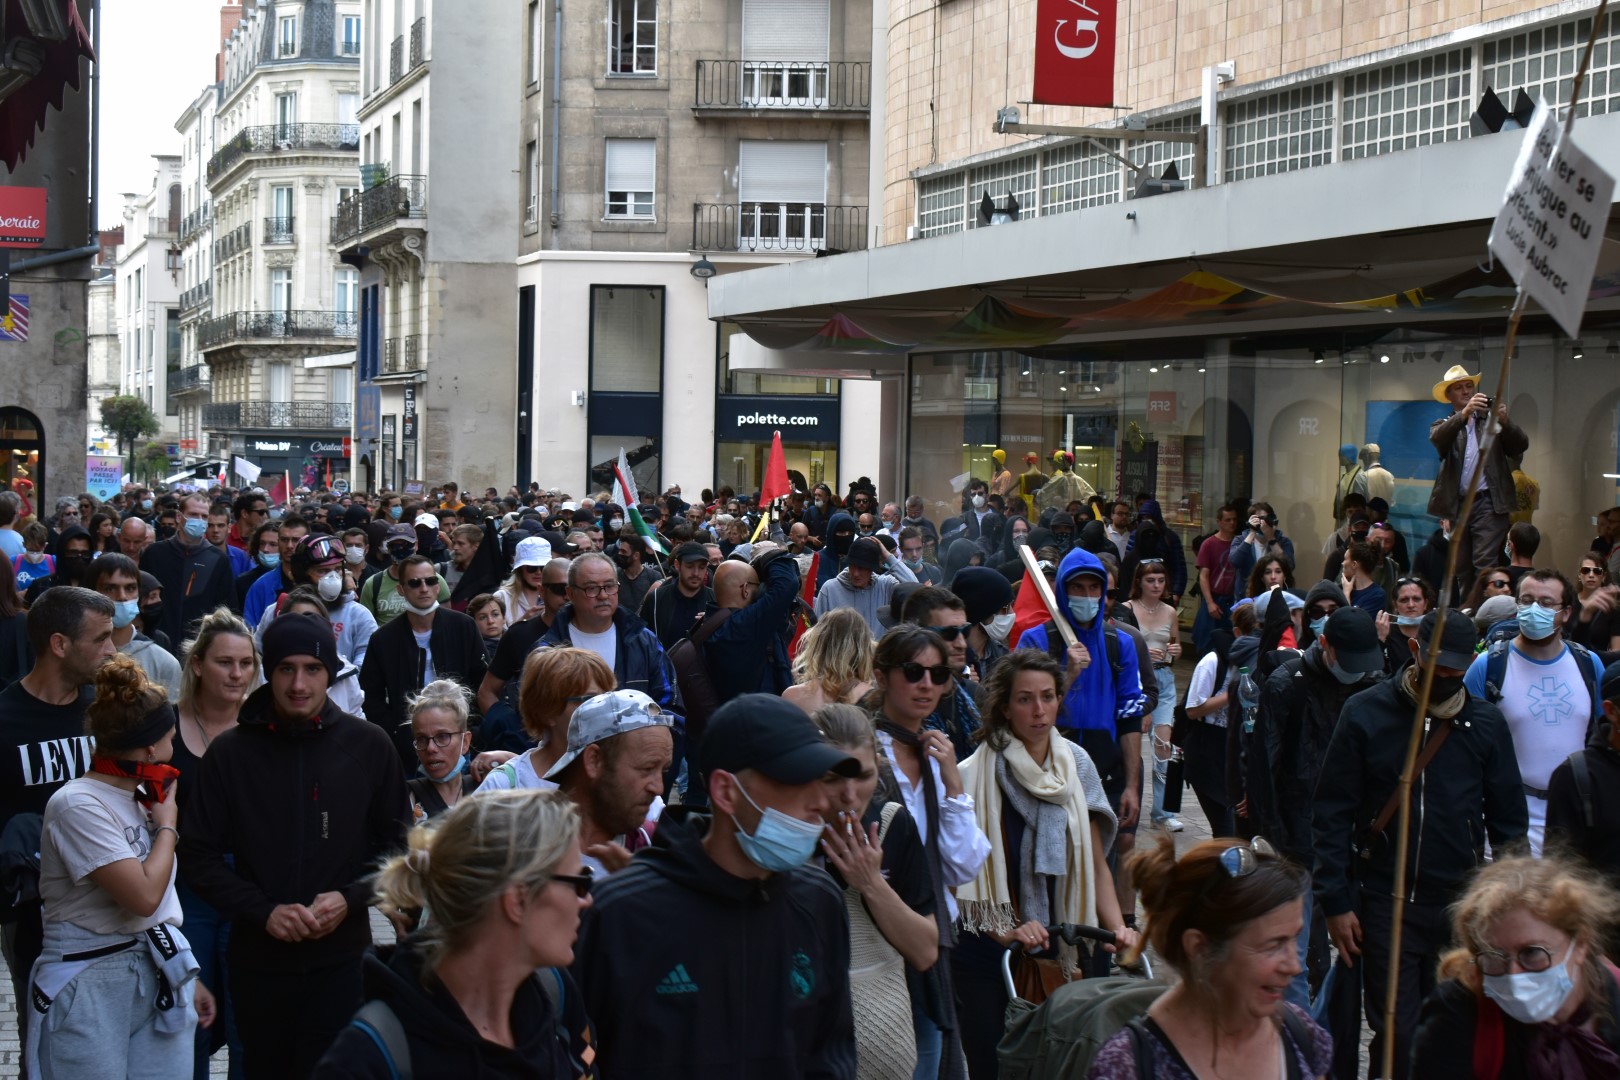 Health pass protest, Nantes, August 7, 2021